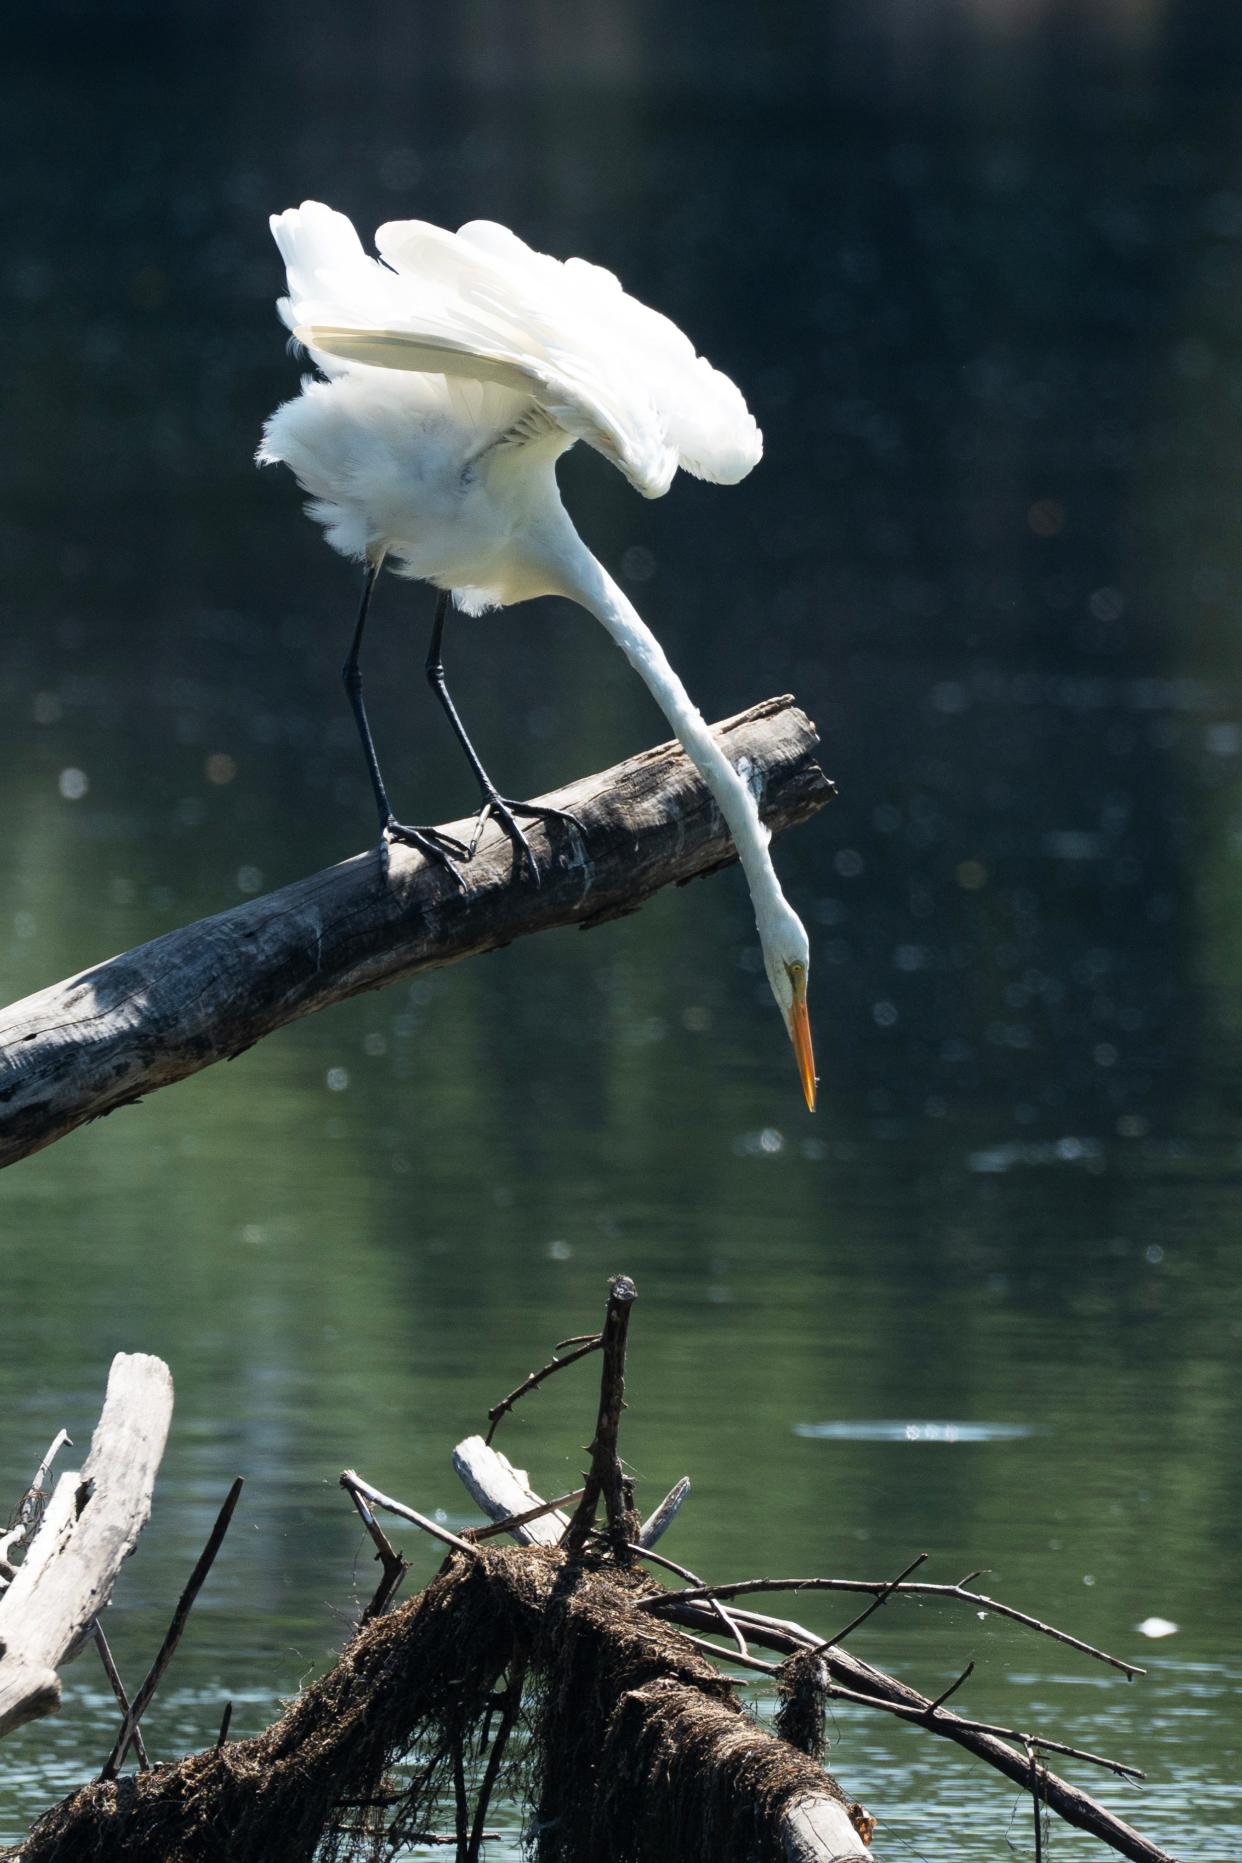 A Great Egret at Westside Park in the Passaic River in Paterson, NJ on Monday July 31, 2023.